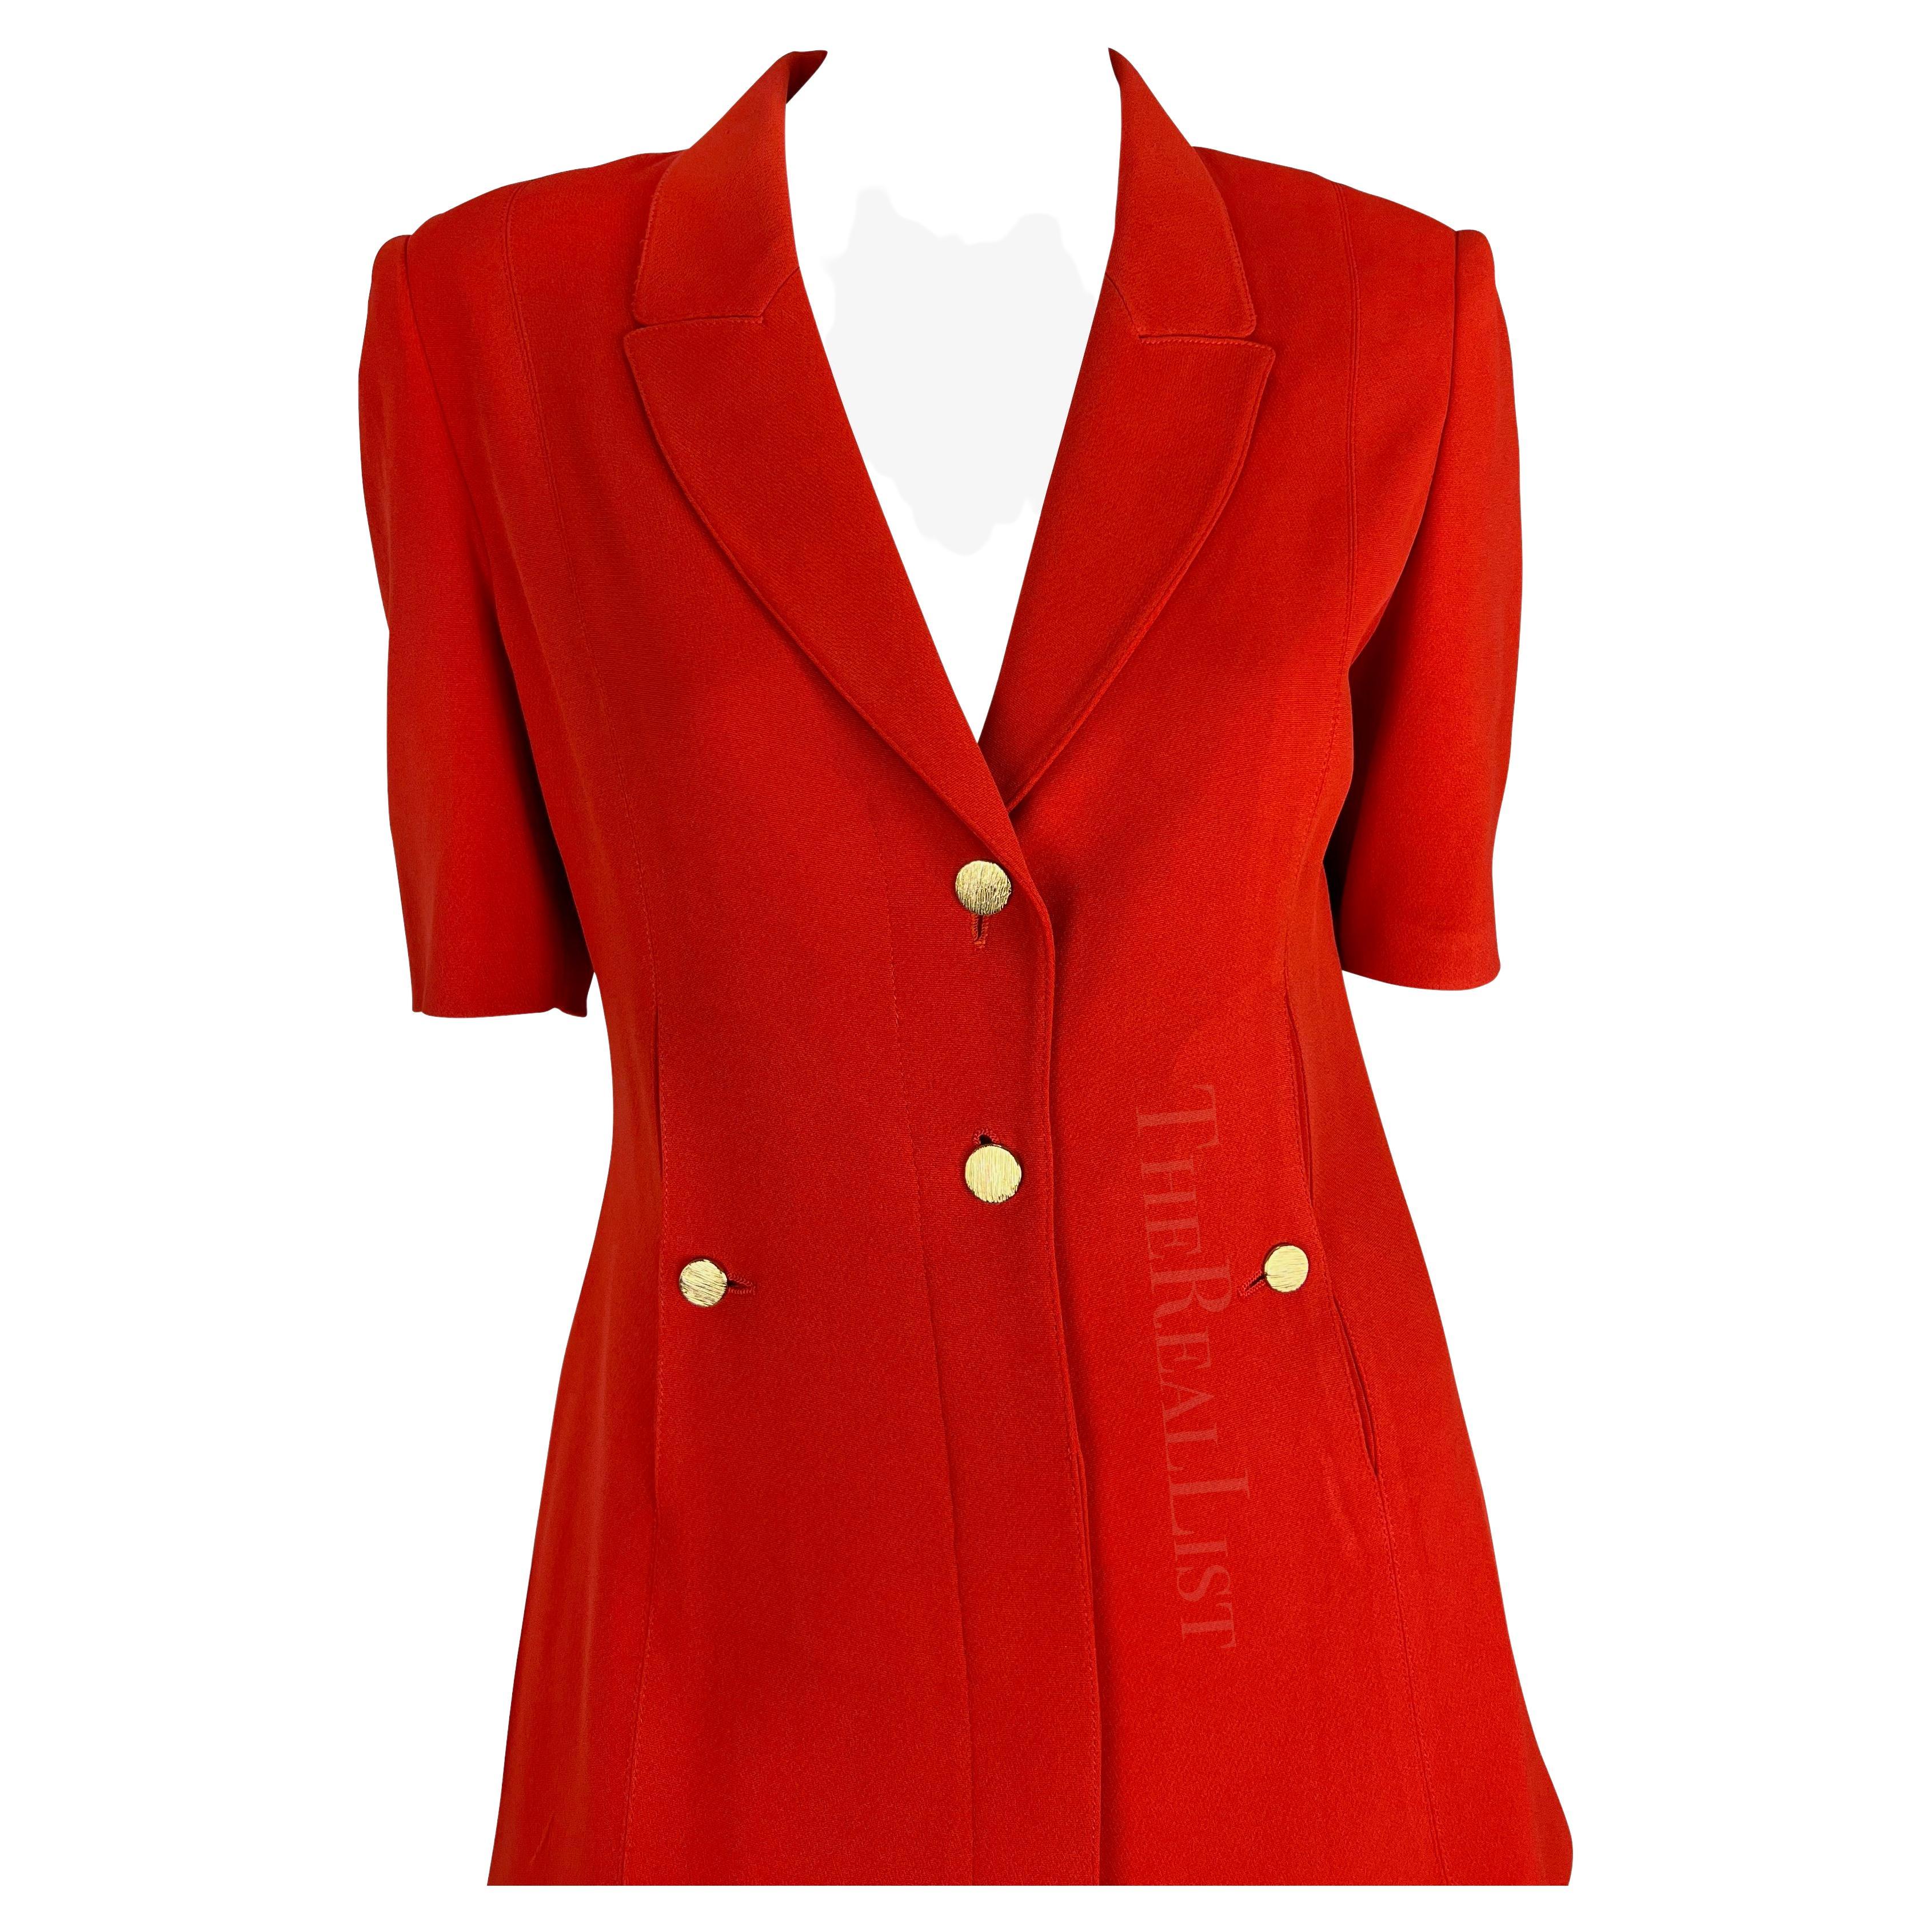 1990s Claude Montana Bright Red Belted Short Sleeve Pant Suit In Excellent Condition For Sale In West Hollywood, CA